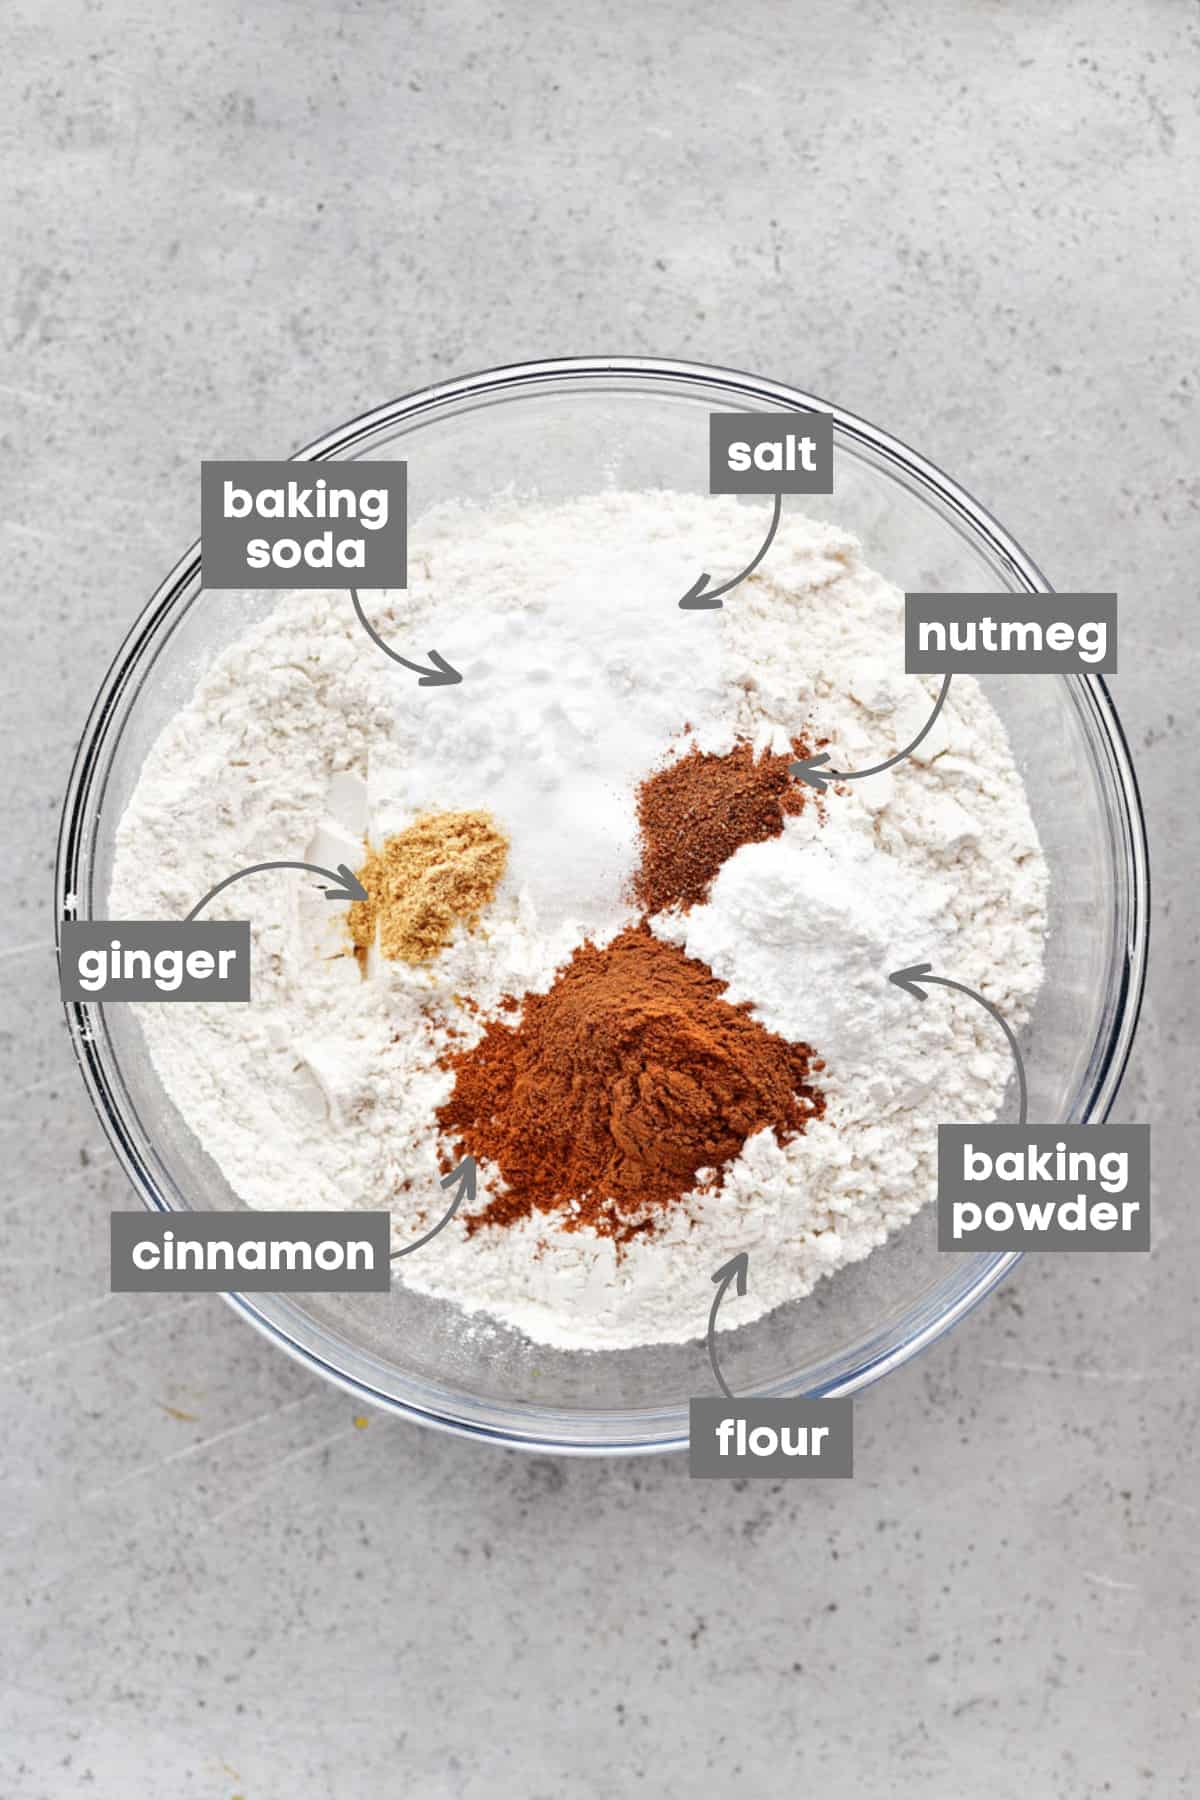 Dry ingredients in a glass bowl.